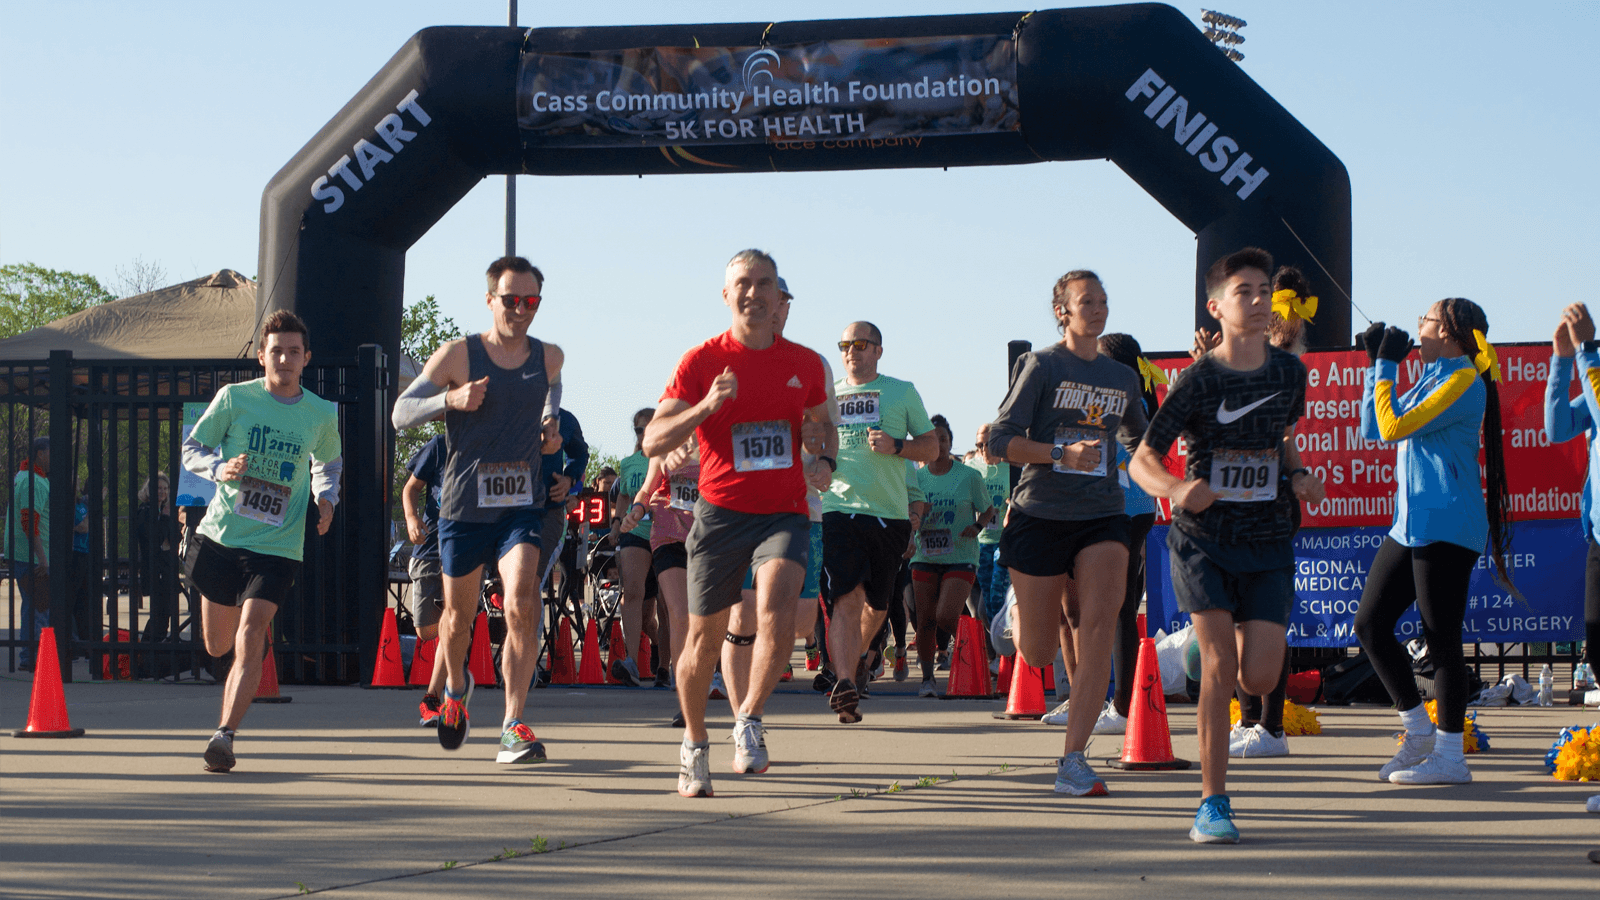 29th Annual 5K for Health